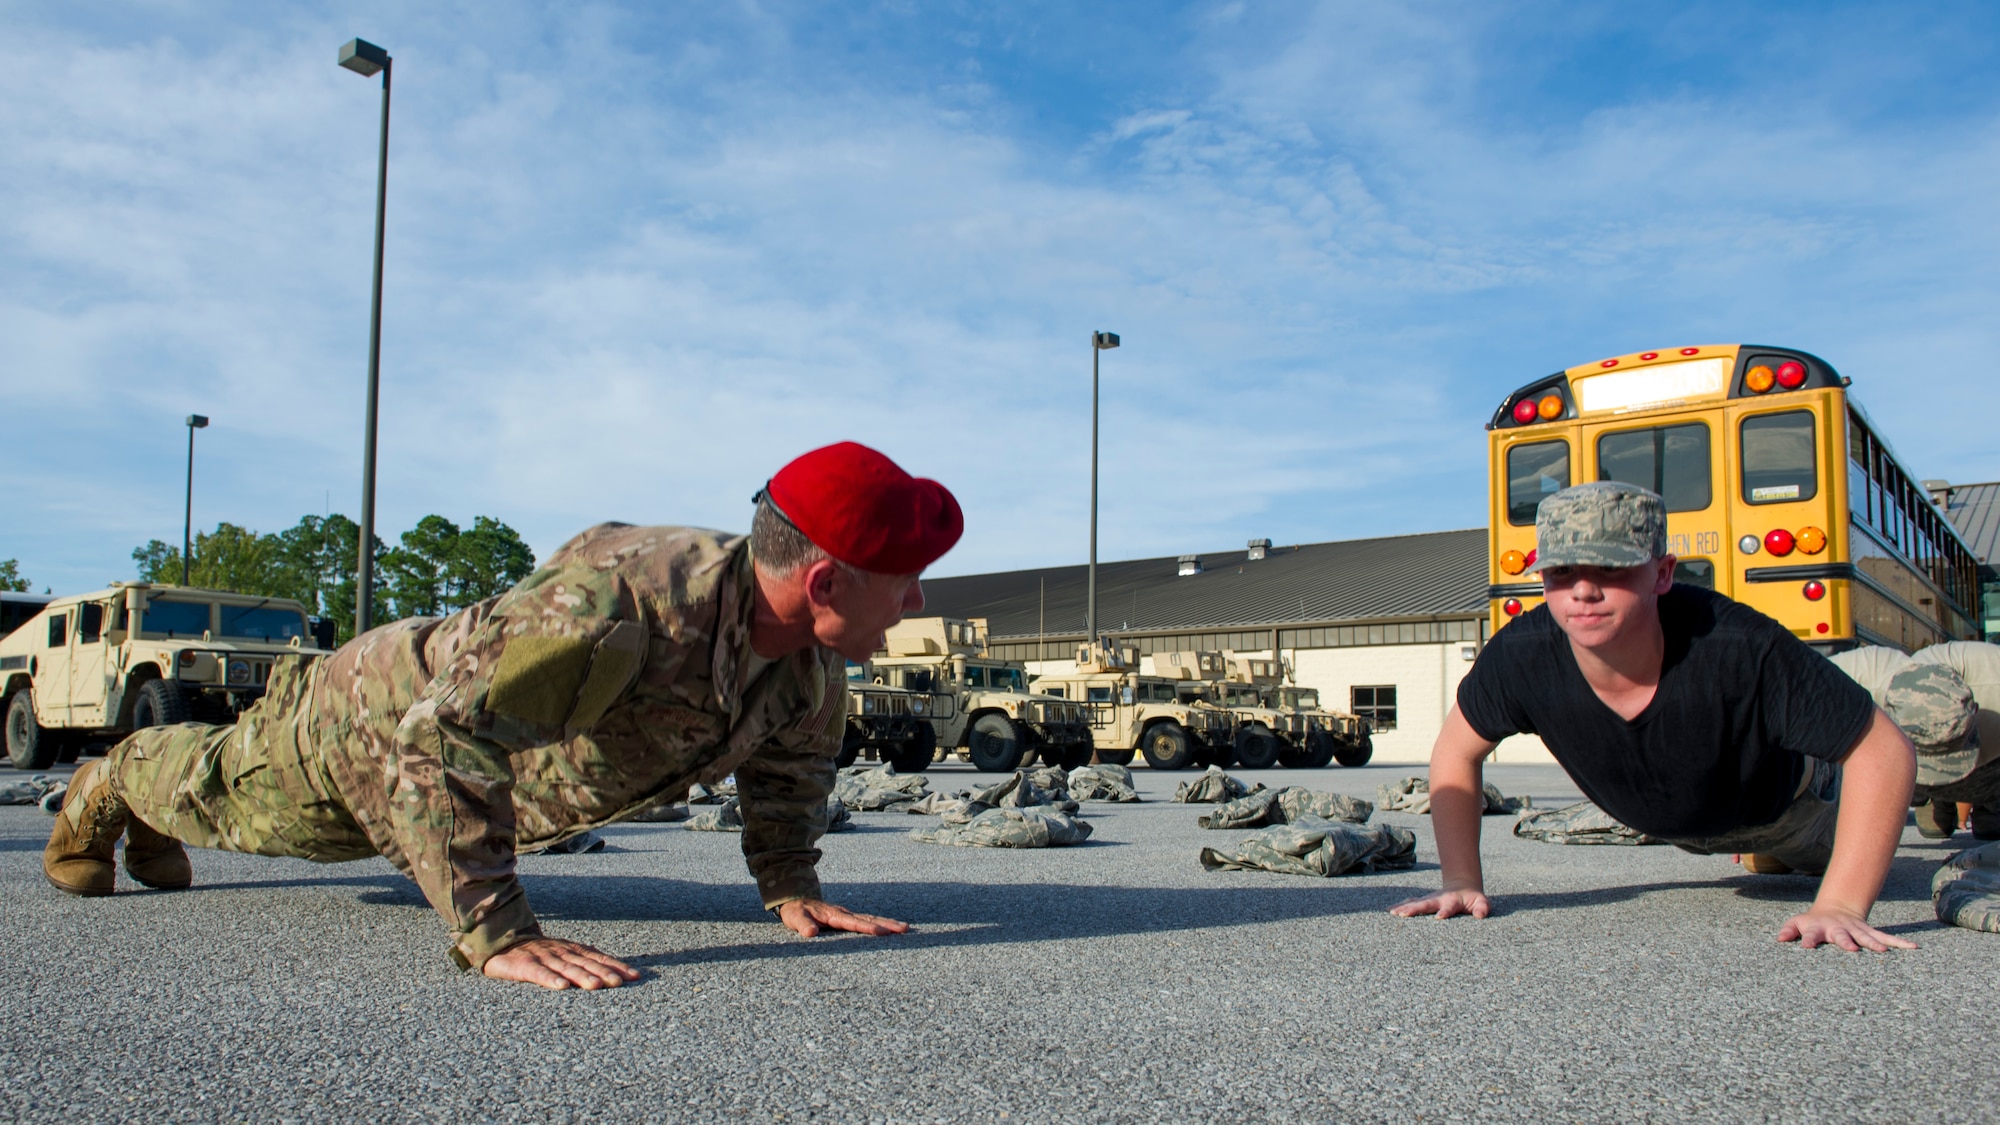 Retired Col. Kenneth Rodriguez, director of Junior ROTC Summer Leadership School, motivates a cadet while doing push-ups at Hurlburt Field, Fla., June 26, 2017. More than 60 JROTC cadets from five local high schools engaged in a variety of team-building and leadership skill-developing exercises during a Summer Leadership School trip to Hurlburt Field, June 26 – 30. (U.S. Air Force photo by Staff Sgt. Victor J. Caputo)